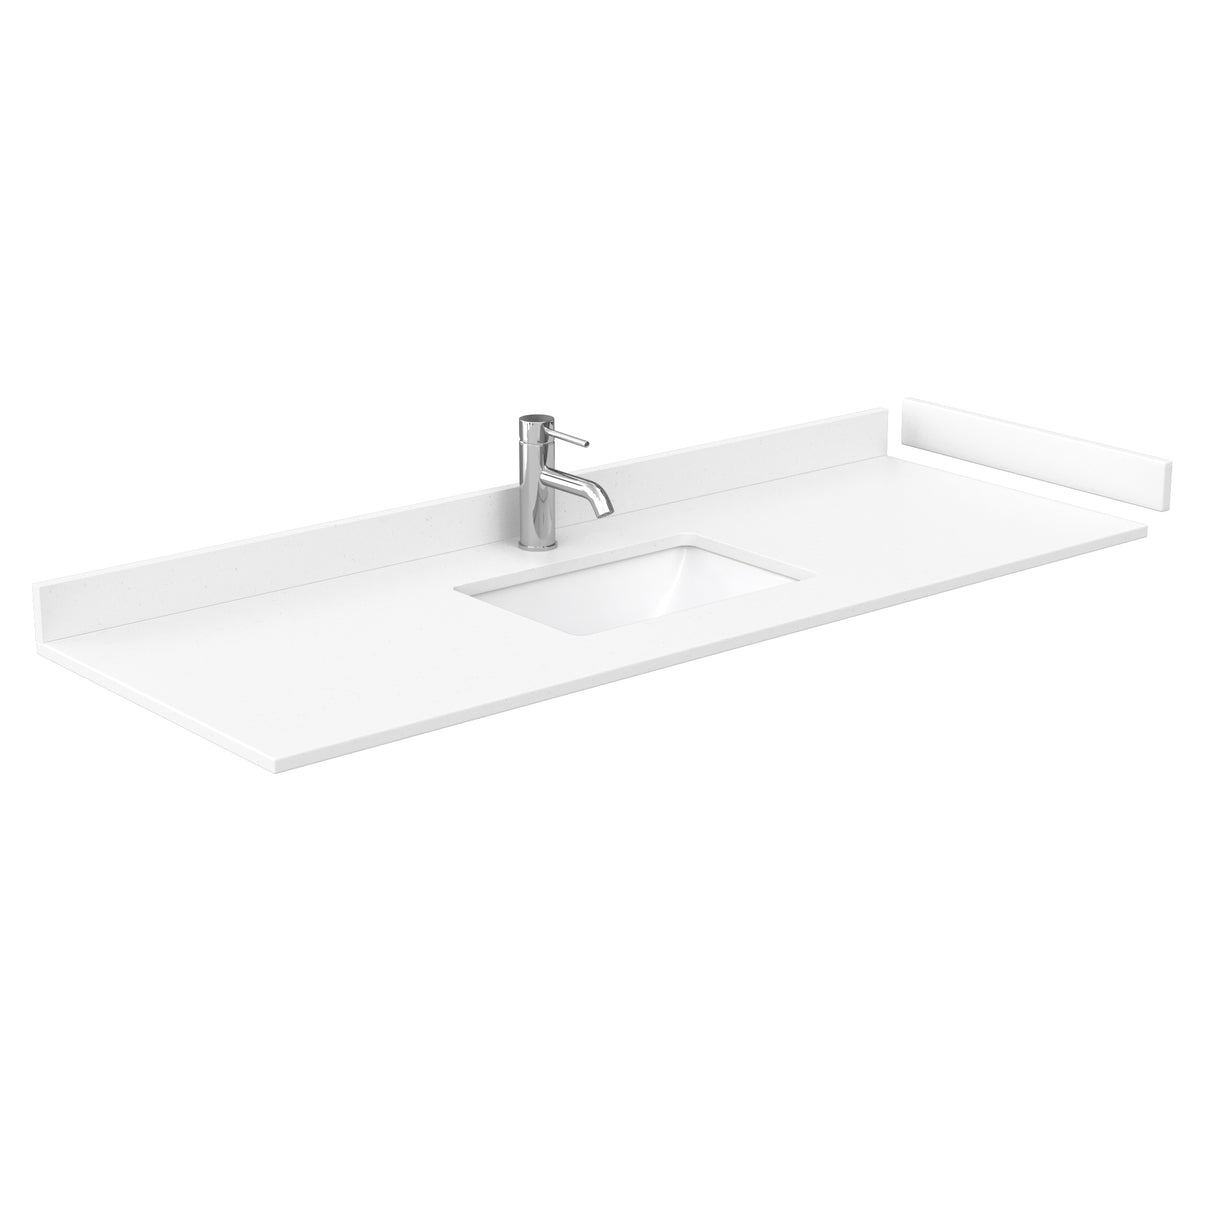 Sheffield 60 Inch Single Bathroom Vanity in White White Cultured Marble Countertop Undermount Square Sink No Mirror